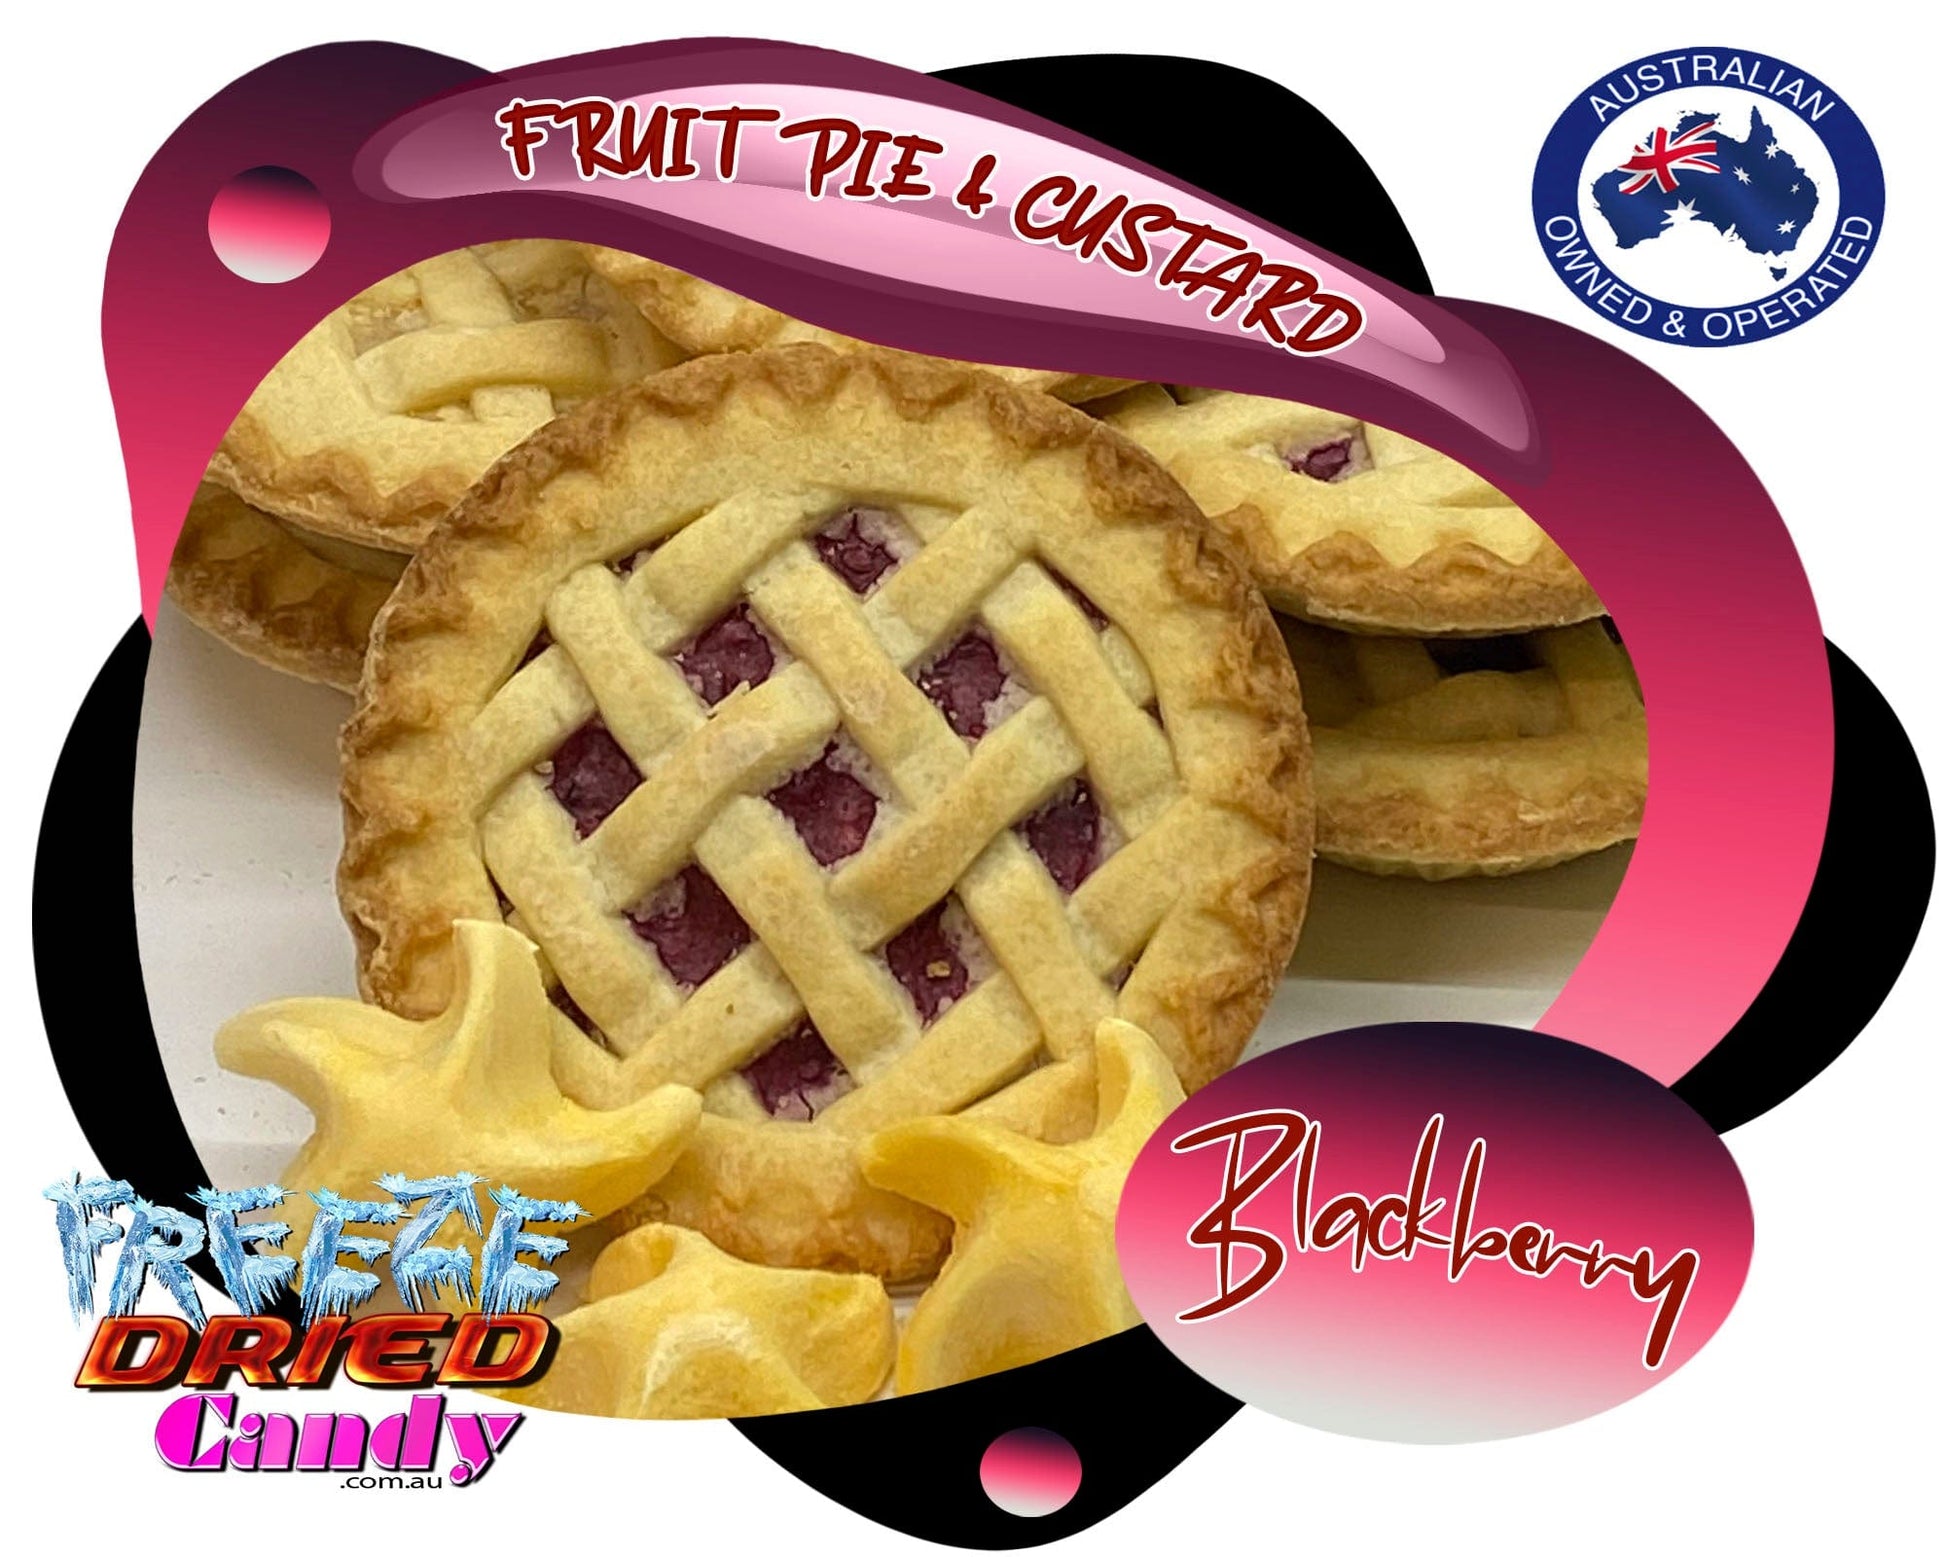 Freeze Dried Fruit Pie & Custard- Apple or  Blackberry- Freeze Dried Candy Lollies & Desserts Sometimes you want a dessert that's READY to eat, ALWAYS good, and this is where Freeze Dried  Fruit Pies comes into play. Combined with Apple or Blackberry pie filling that's baked in a buttery, flaky crust, with a side serve of Freeze Dried Vanilla Custard.  Every bite is worthwhile!  